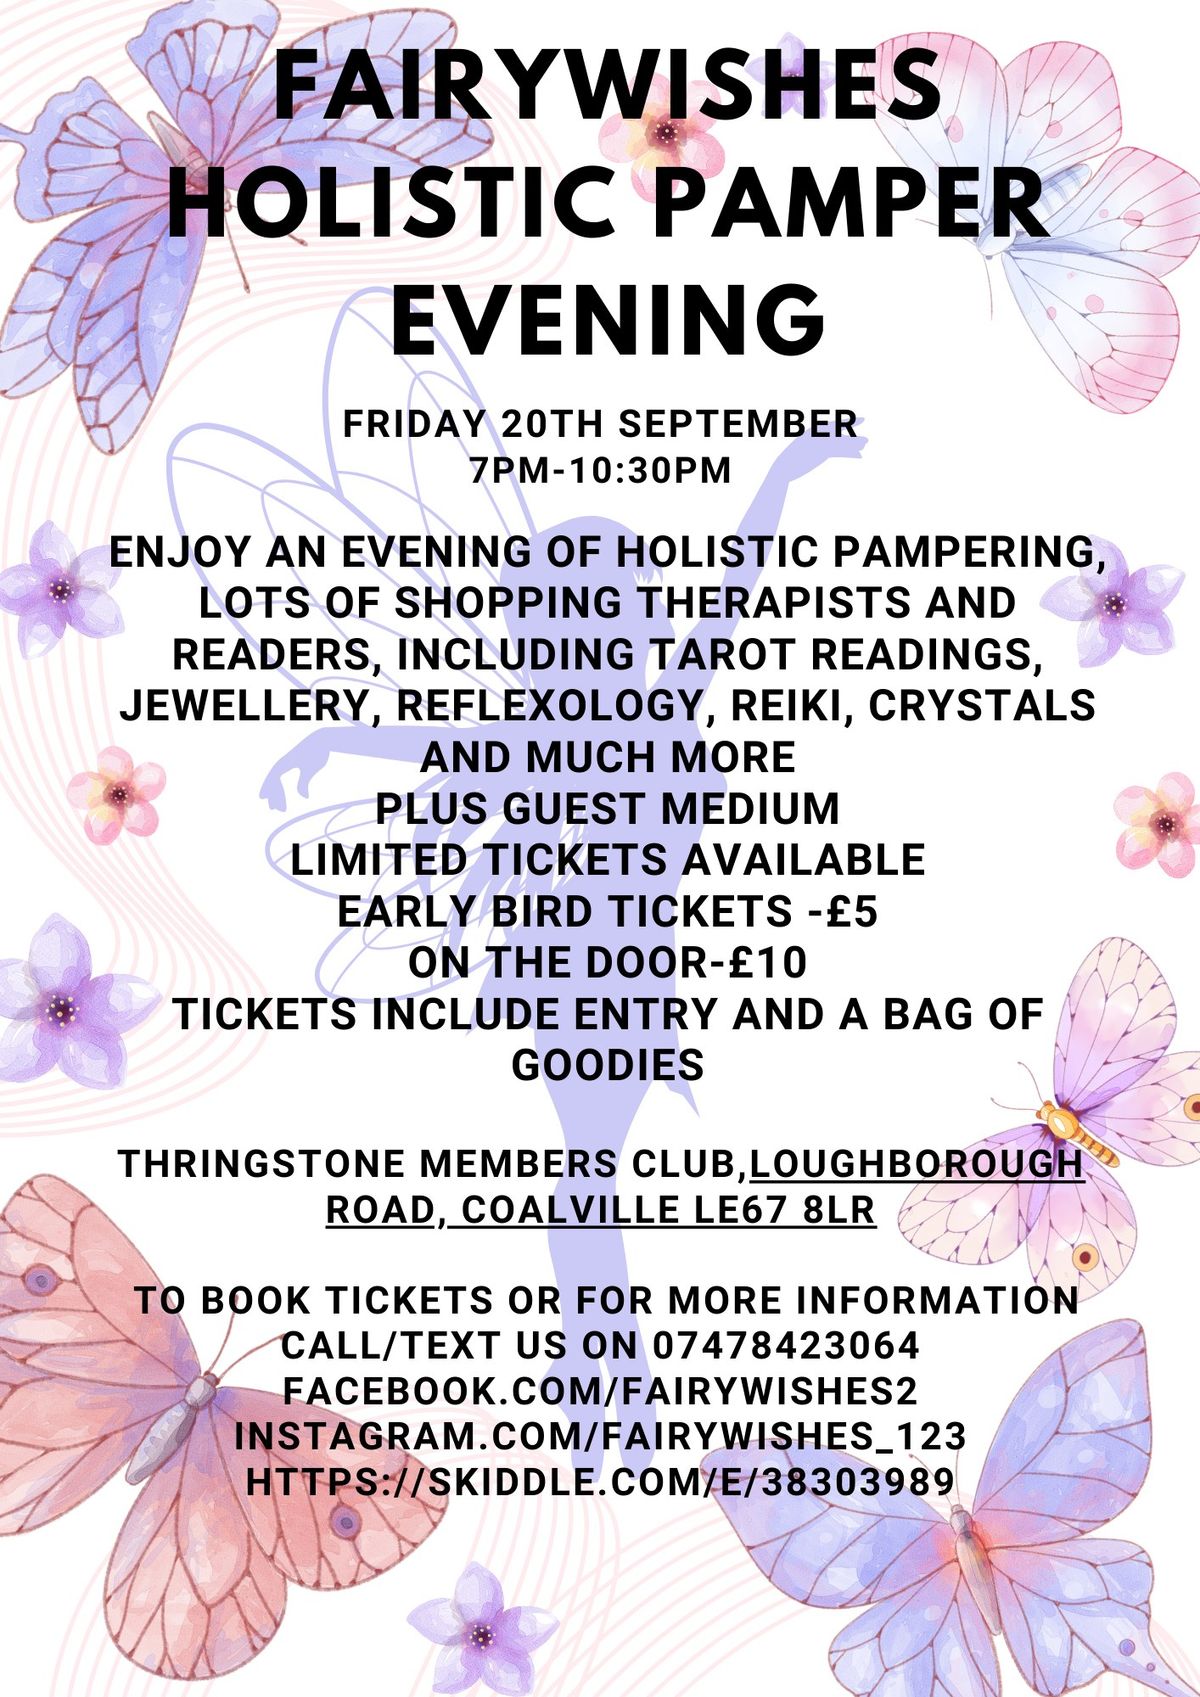 Fariywishes Holistic pamper evening 